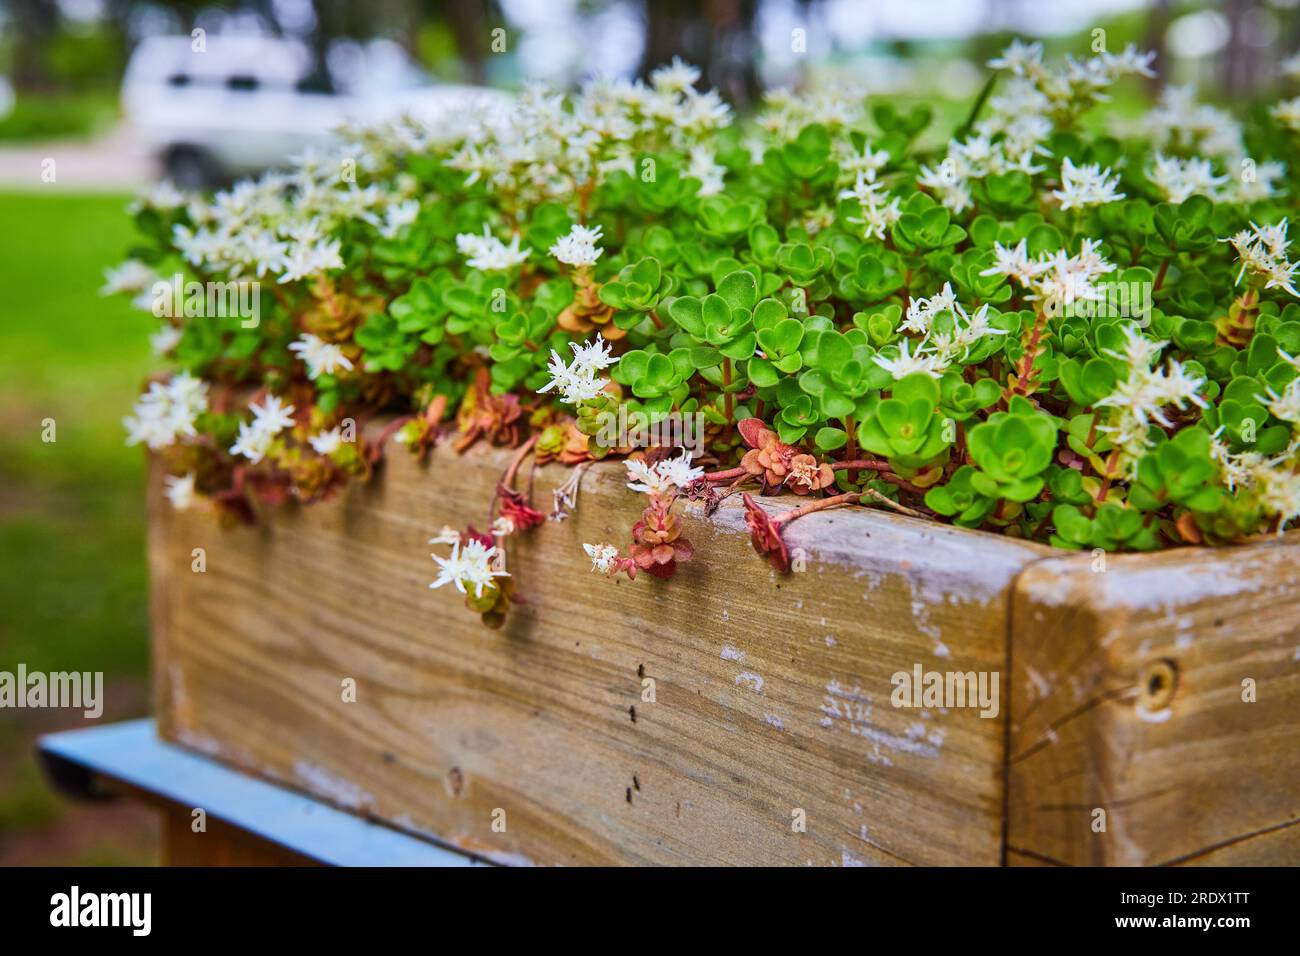 Wooden flower garden box with blooming white succulent flowers on Three Leaved Stonecrop Stock Photo